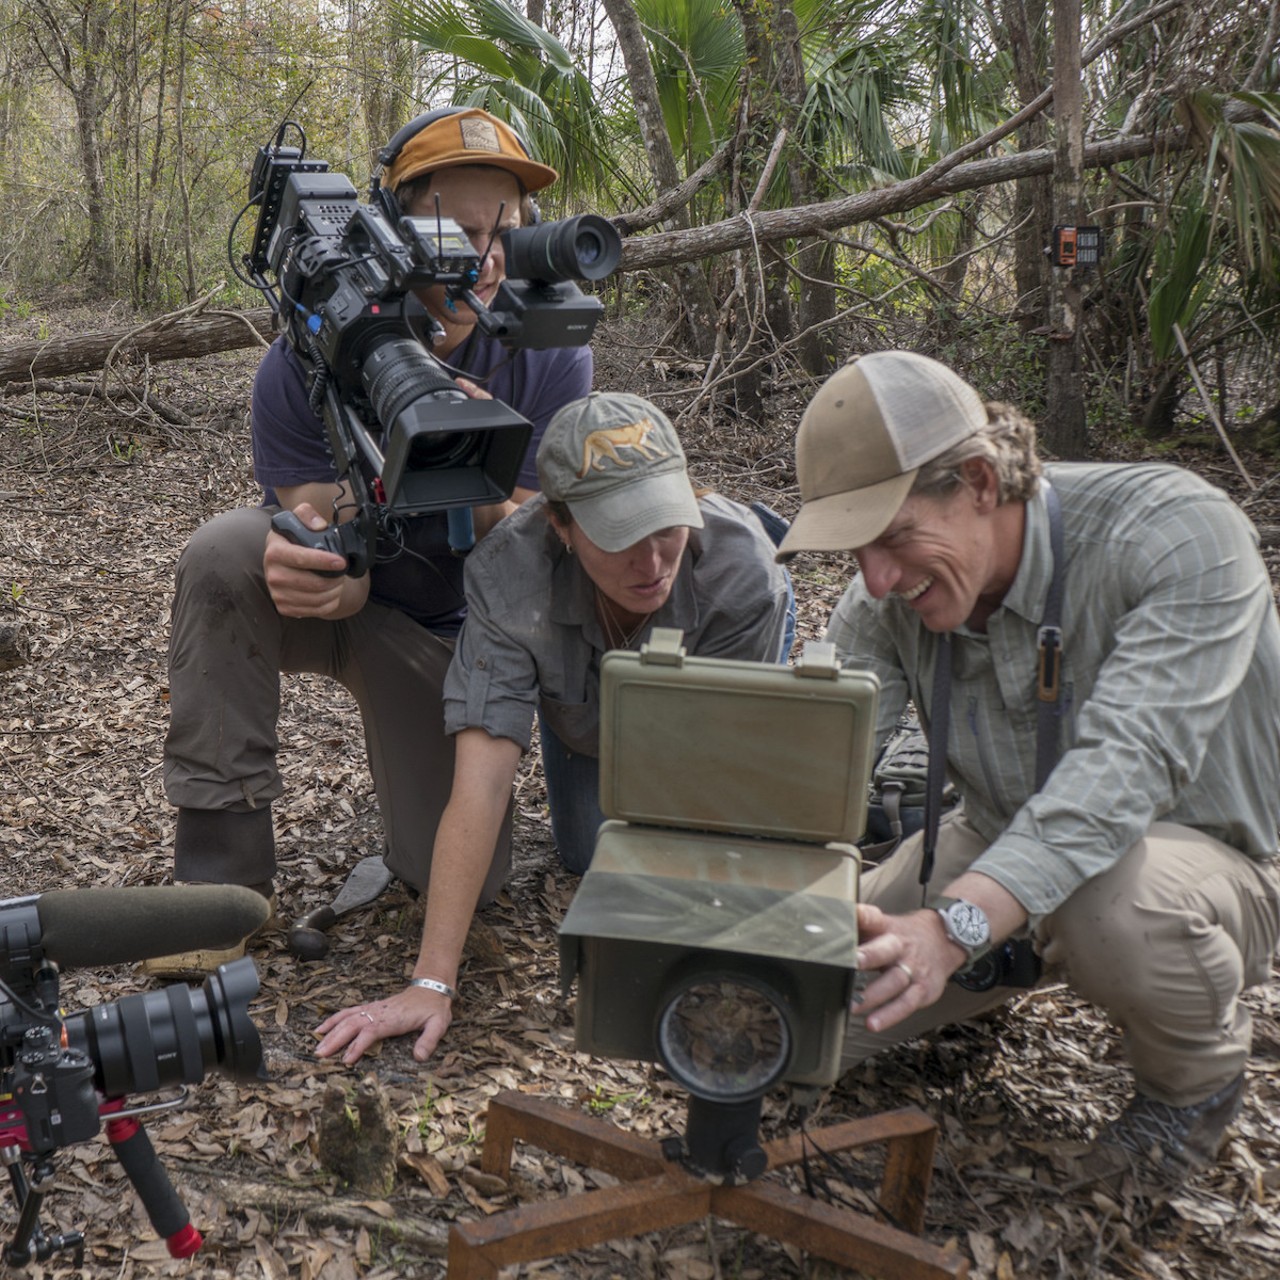 Carlton Ward Jr. and Dr. Jen Korn discover the first photos of panther kittens North of the Caloosahatchee River in nearly fifty years as cinematographers Danny Schmidt and Eric Bendick capture the moment. Moments like this one left an indelible mark on the teams from Grizzly Creek Films and Wildpath who dedicated over five years to the making of Path of the Panther.